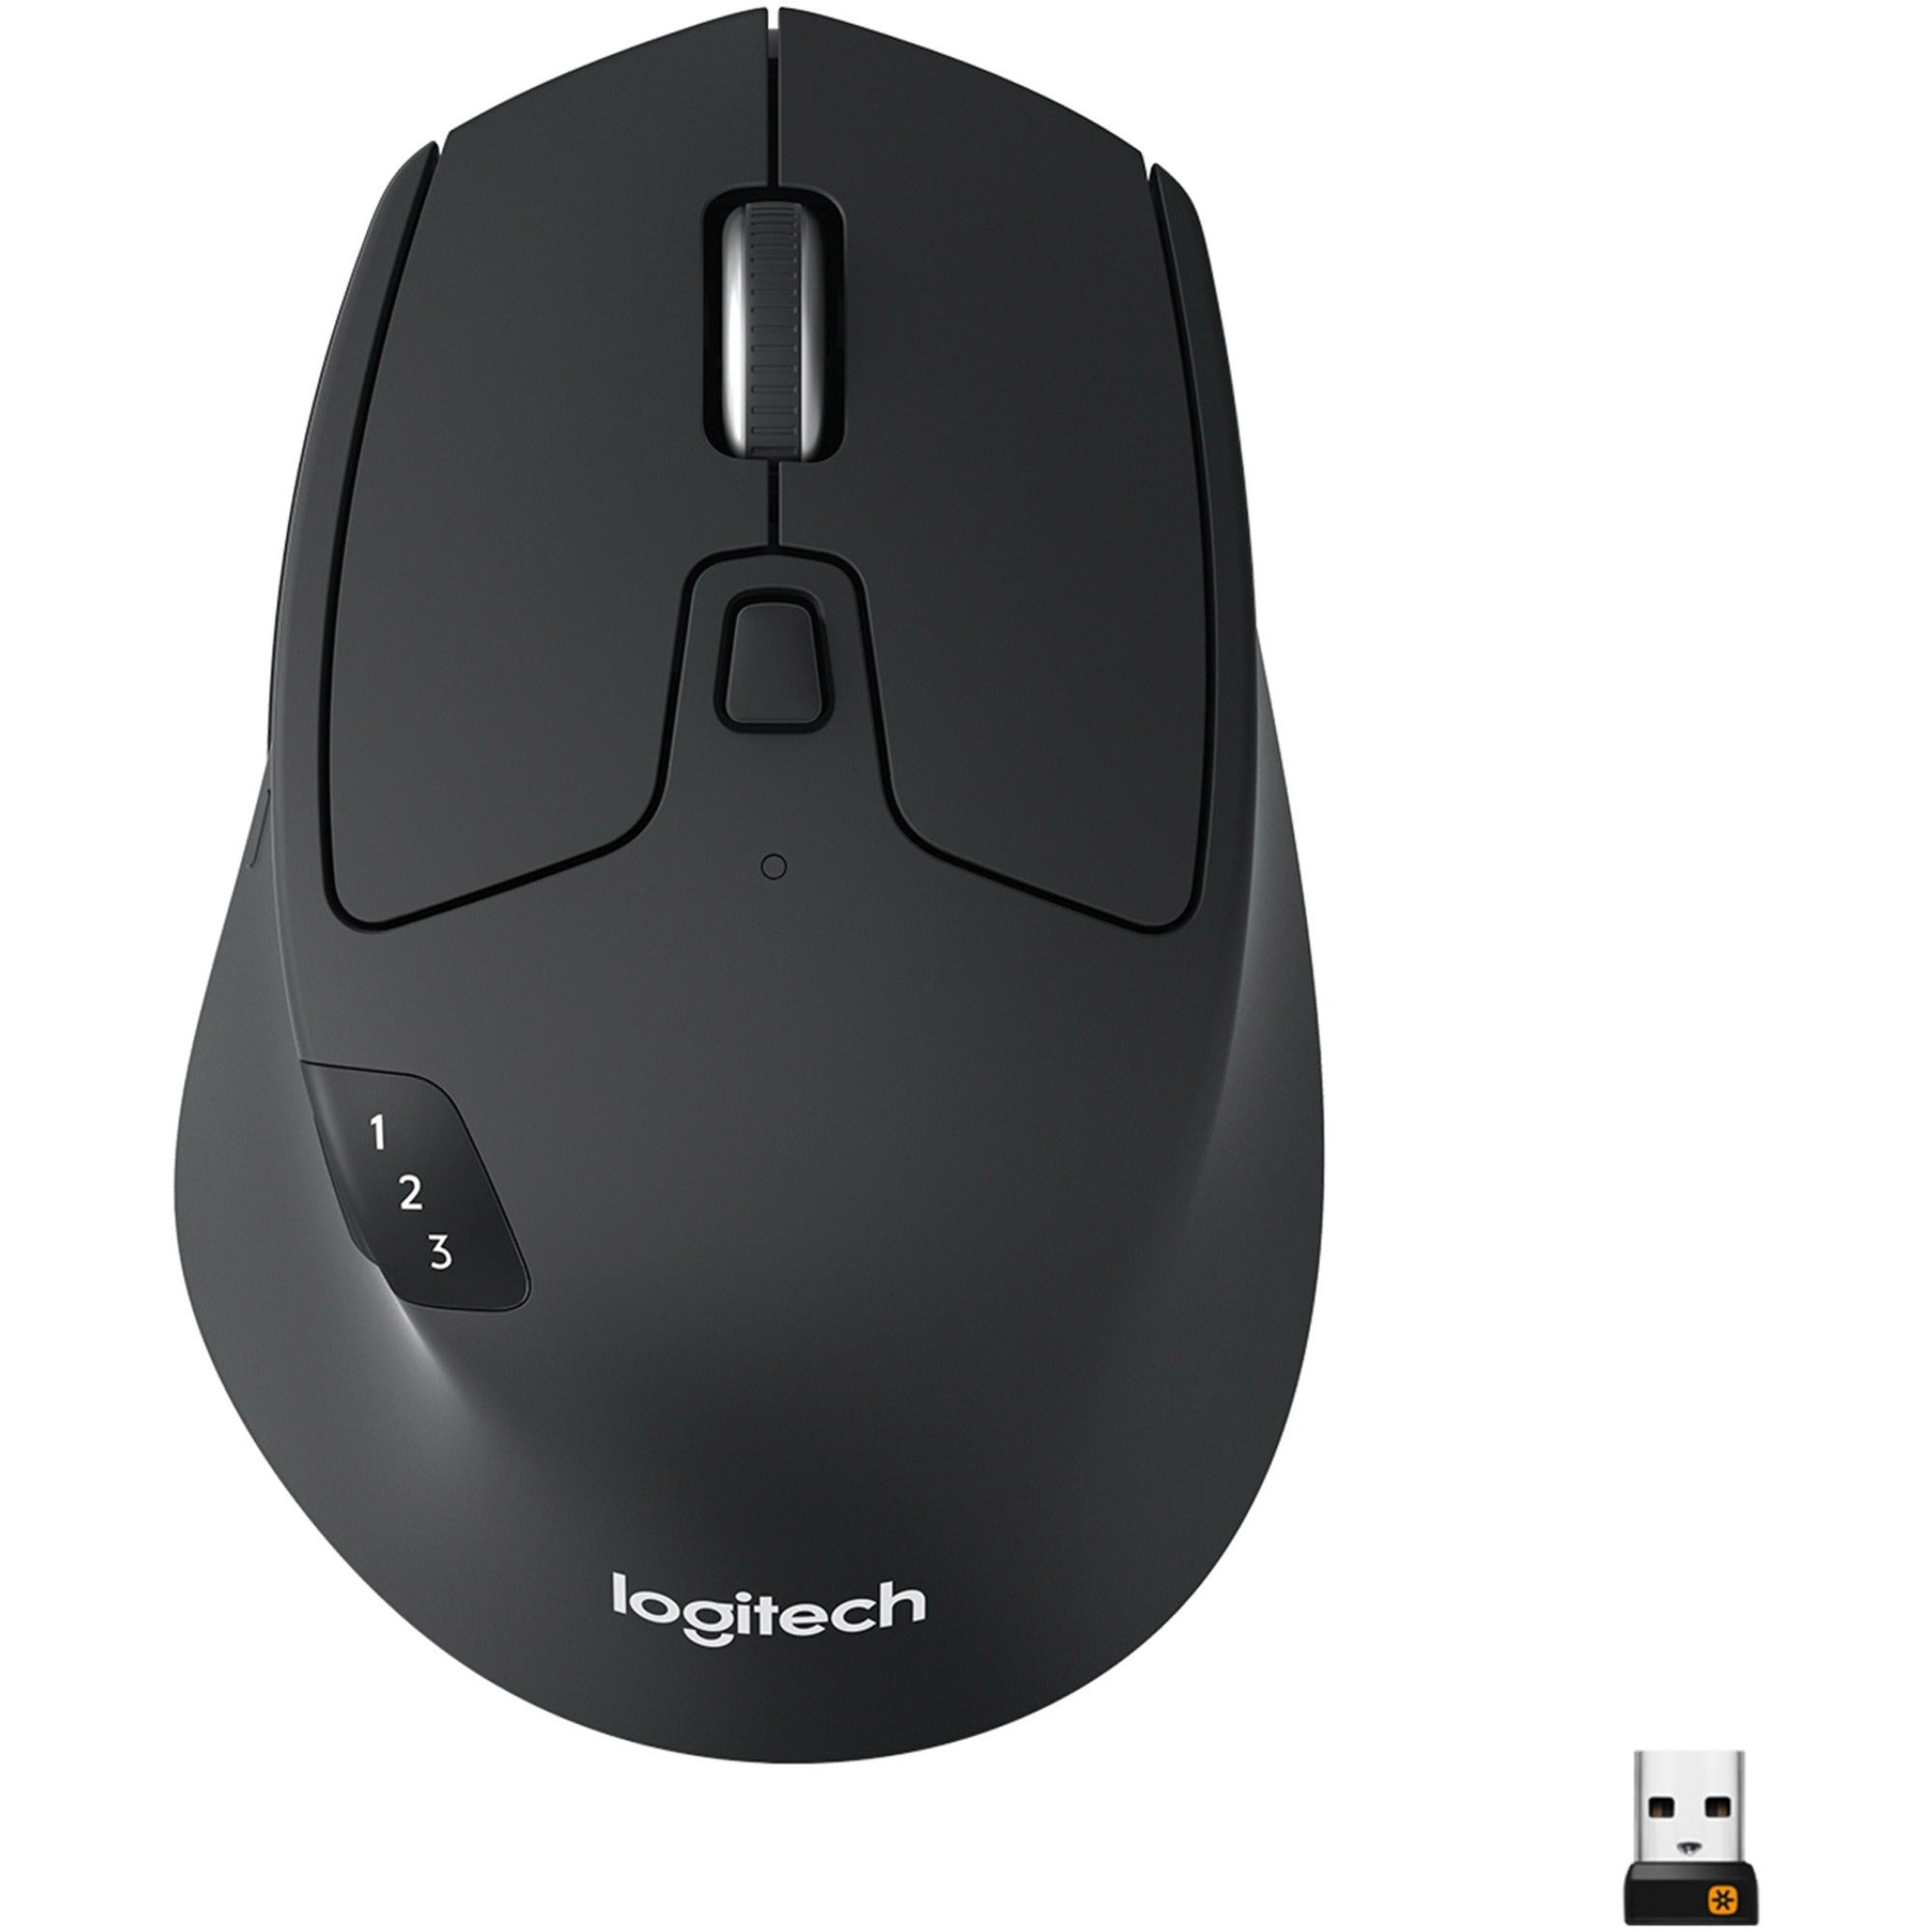 logitech-m720-triathlon-multi-device-wireless-mouse-bluetooth-usb-unifying-receiver-1000-dpi-8-buttons-2-year-battery-compatible-with-laptop-pc-mac-ipados-black-optical-wireless-bluetooth-radio-frequency-240-ghz-black-1-pack-_log910004790 - 1